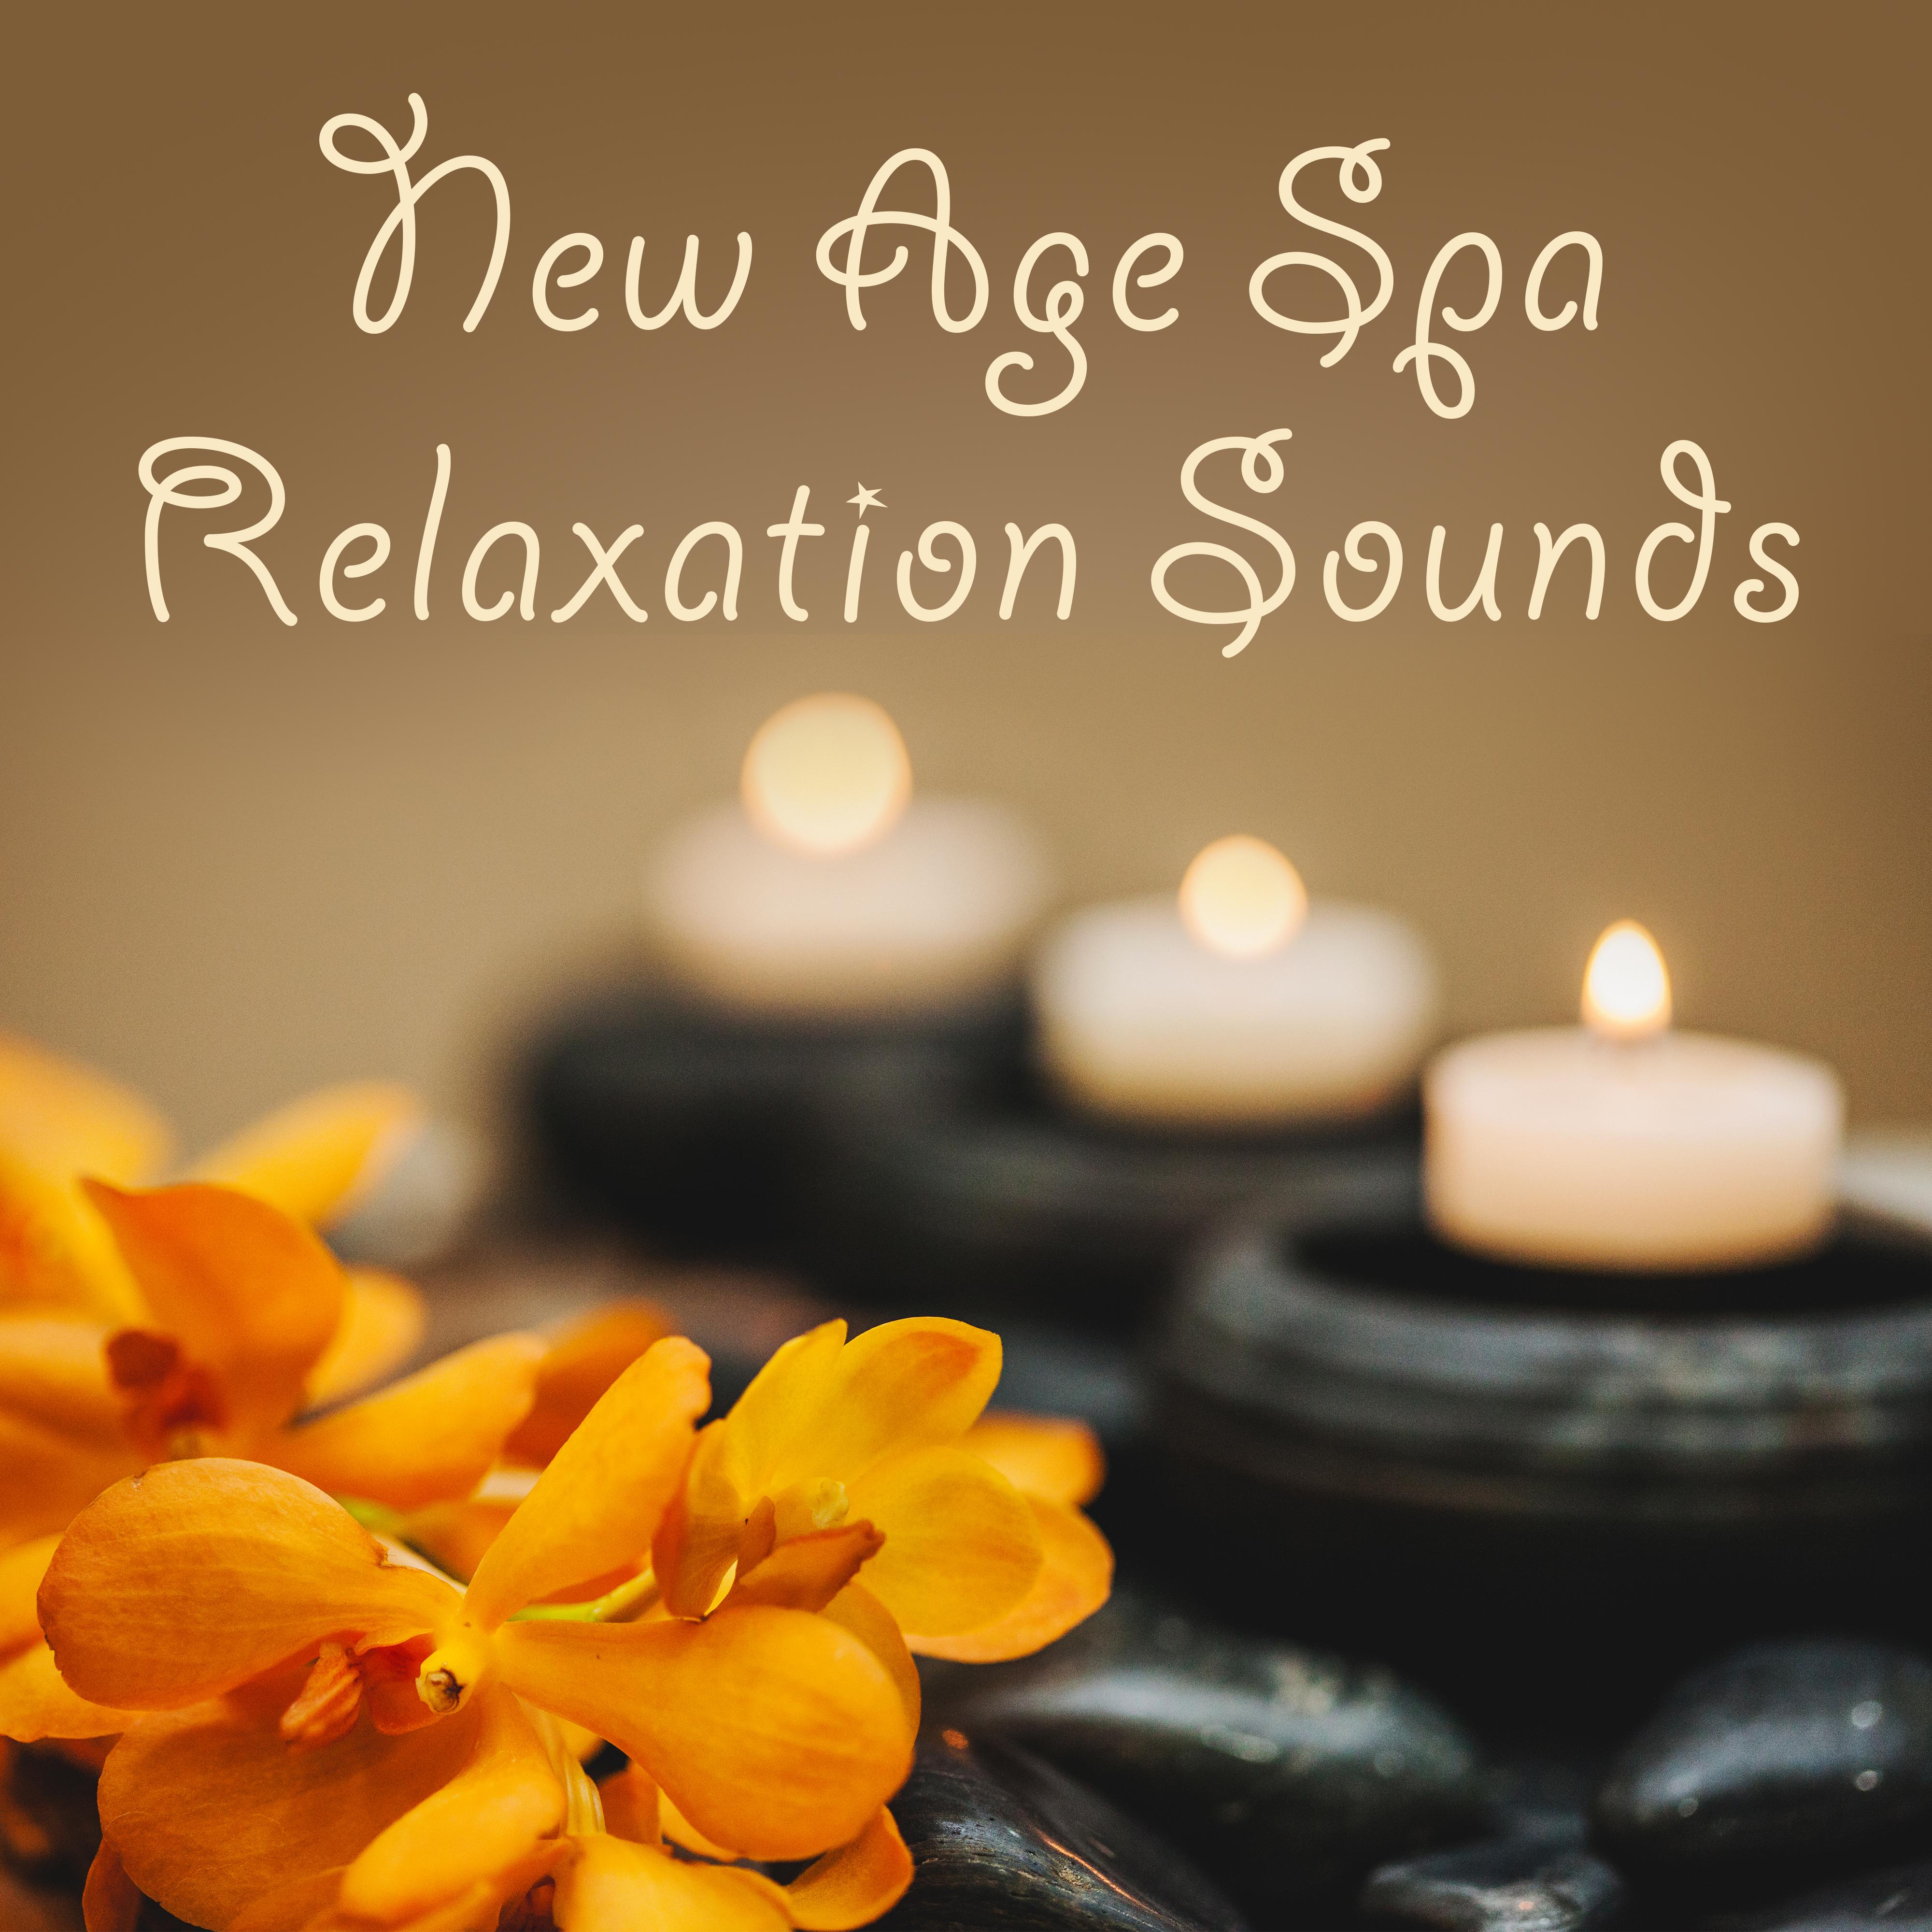 New Age Spa Relaxation Sounds